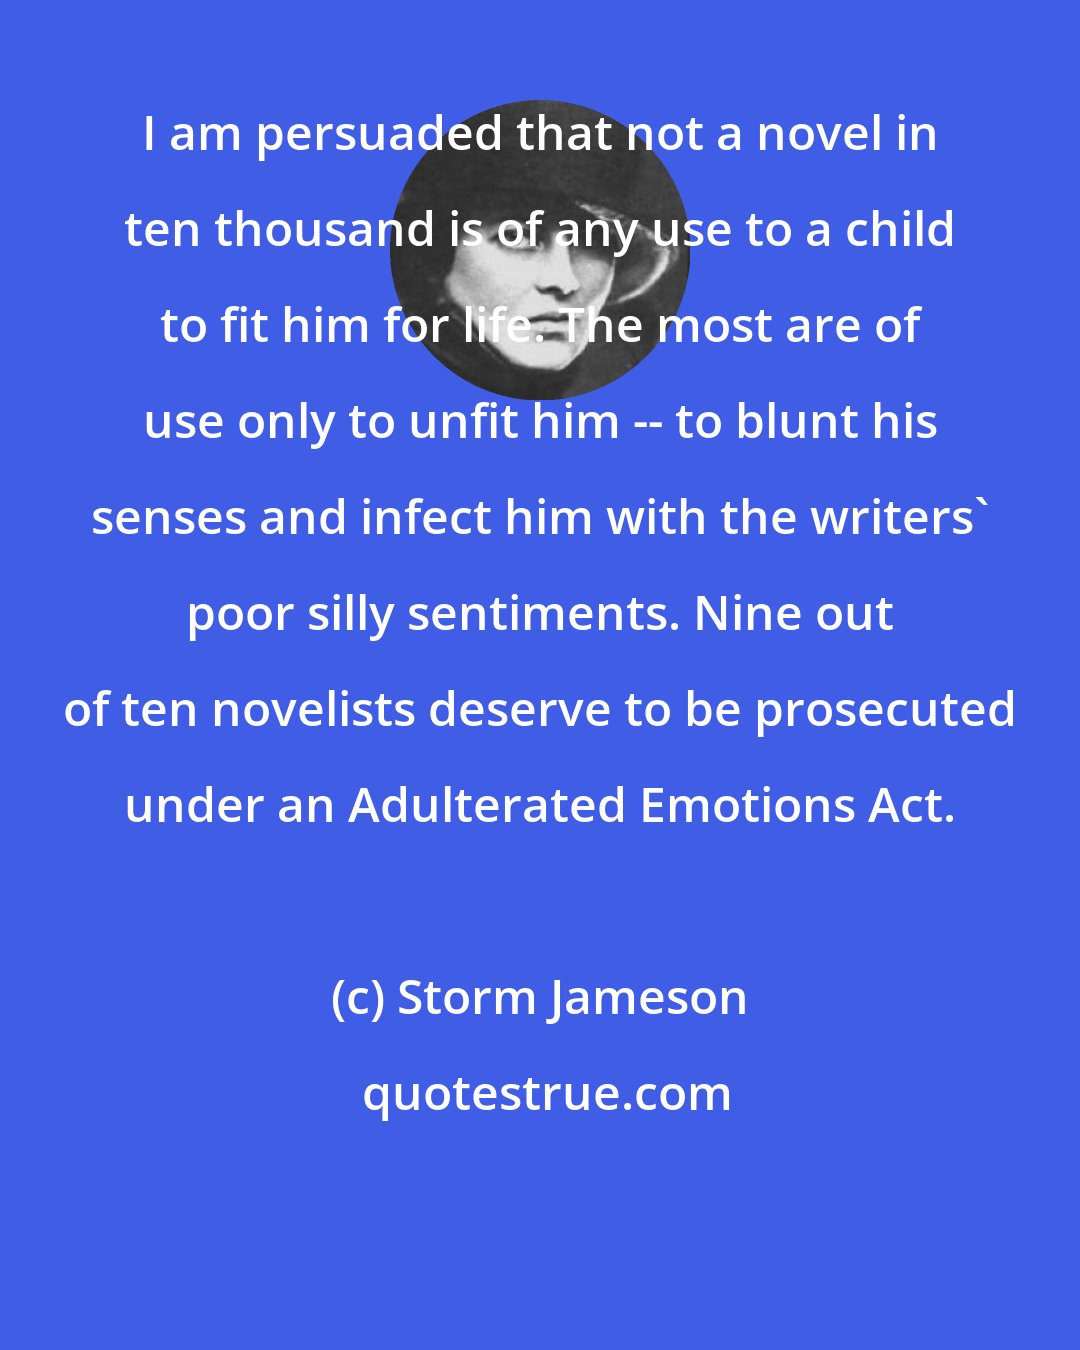 Storm Jameson: I am persuaded that not a novel in ten thousand is of any use to a child to fit him for life. The most are of use only to unfit him -- to blunt his senses and infect him with the writers' poor silly sentiments. Nine out of ten novelists deserve to be prosecuted under an Adulterated Emotions Act.